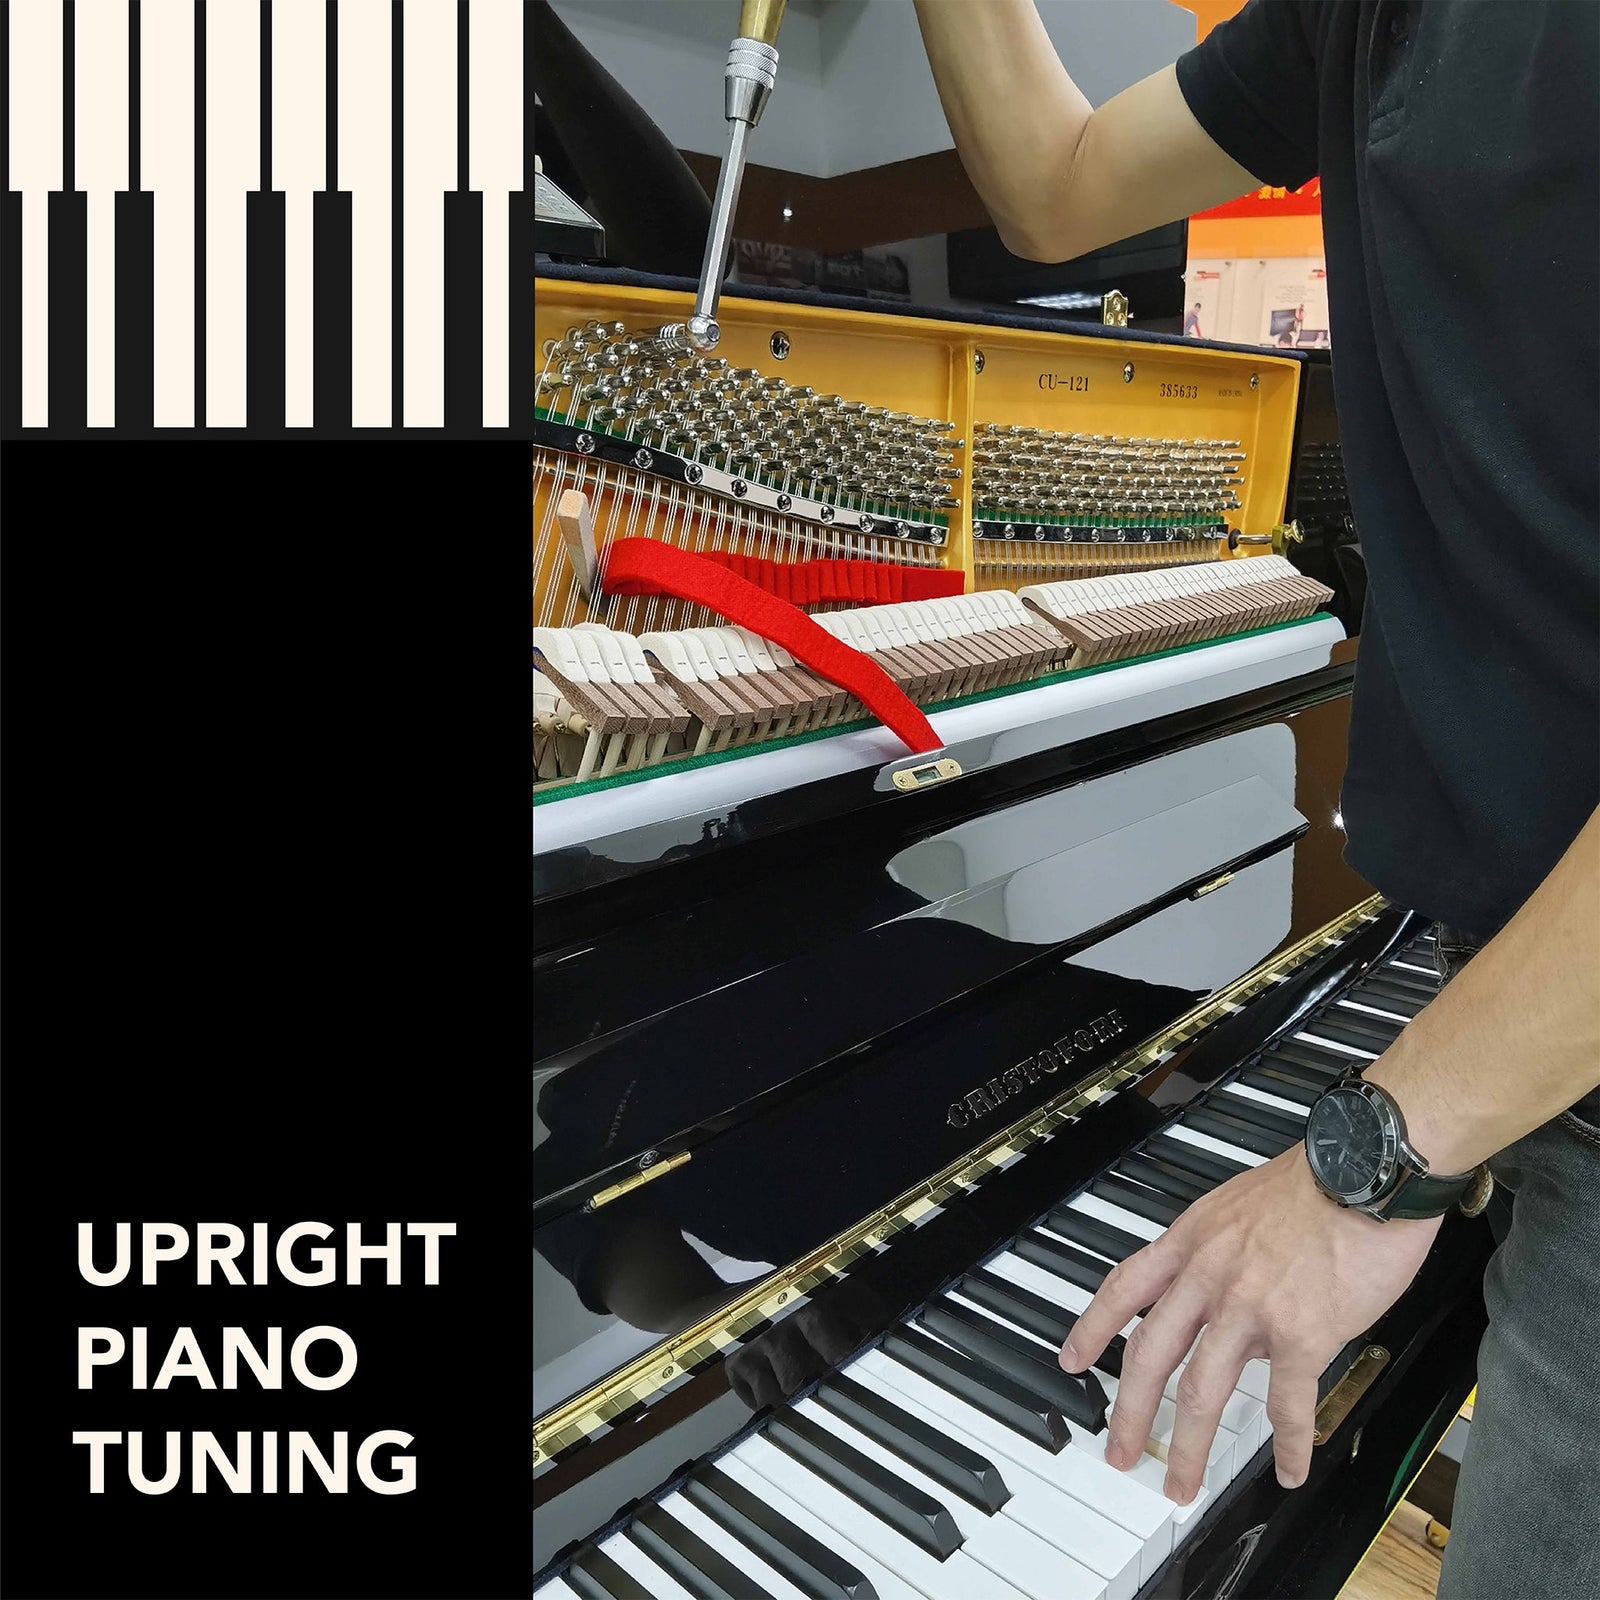 Tuning - Upright Piano (to be utitlized once every 6 mths after purchase)